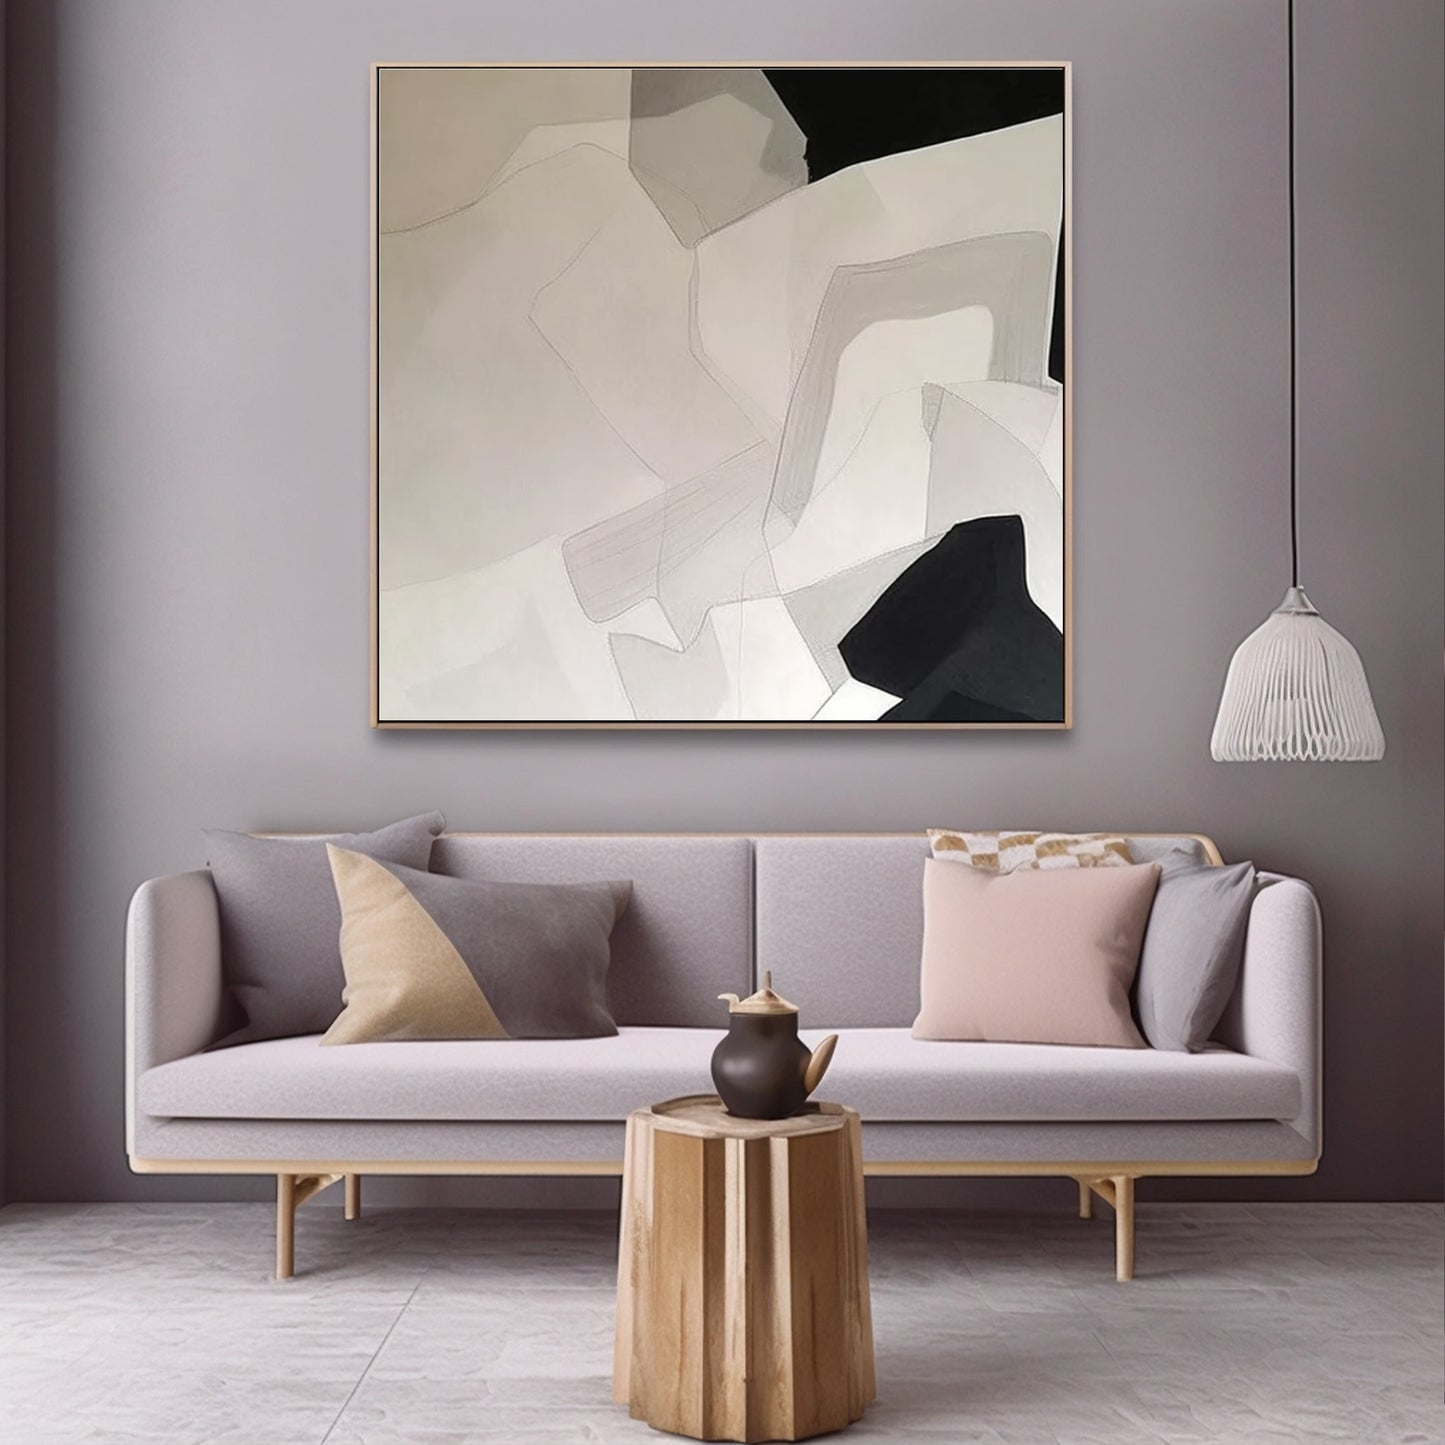 Original Abstract Art Acrylic Paintings Abstract Wall Art Canvas Wall Art For Living room Black and White SKU-BW23-33